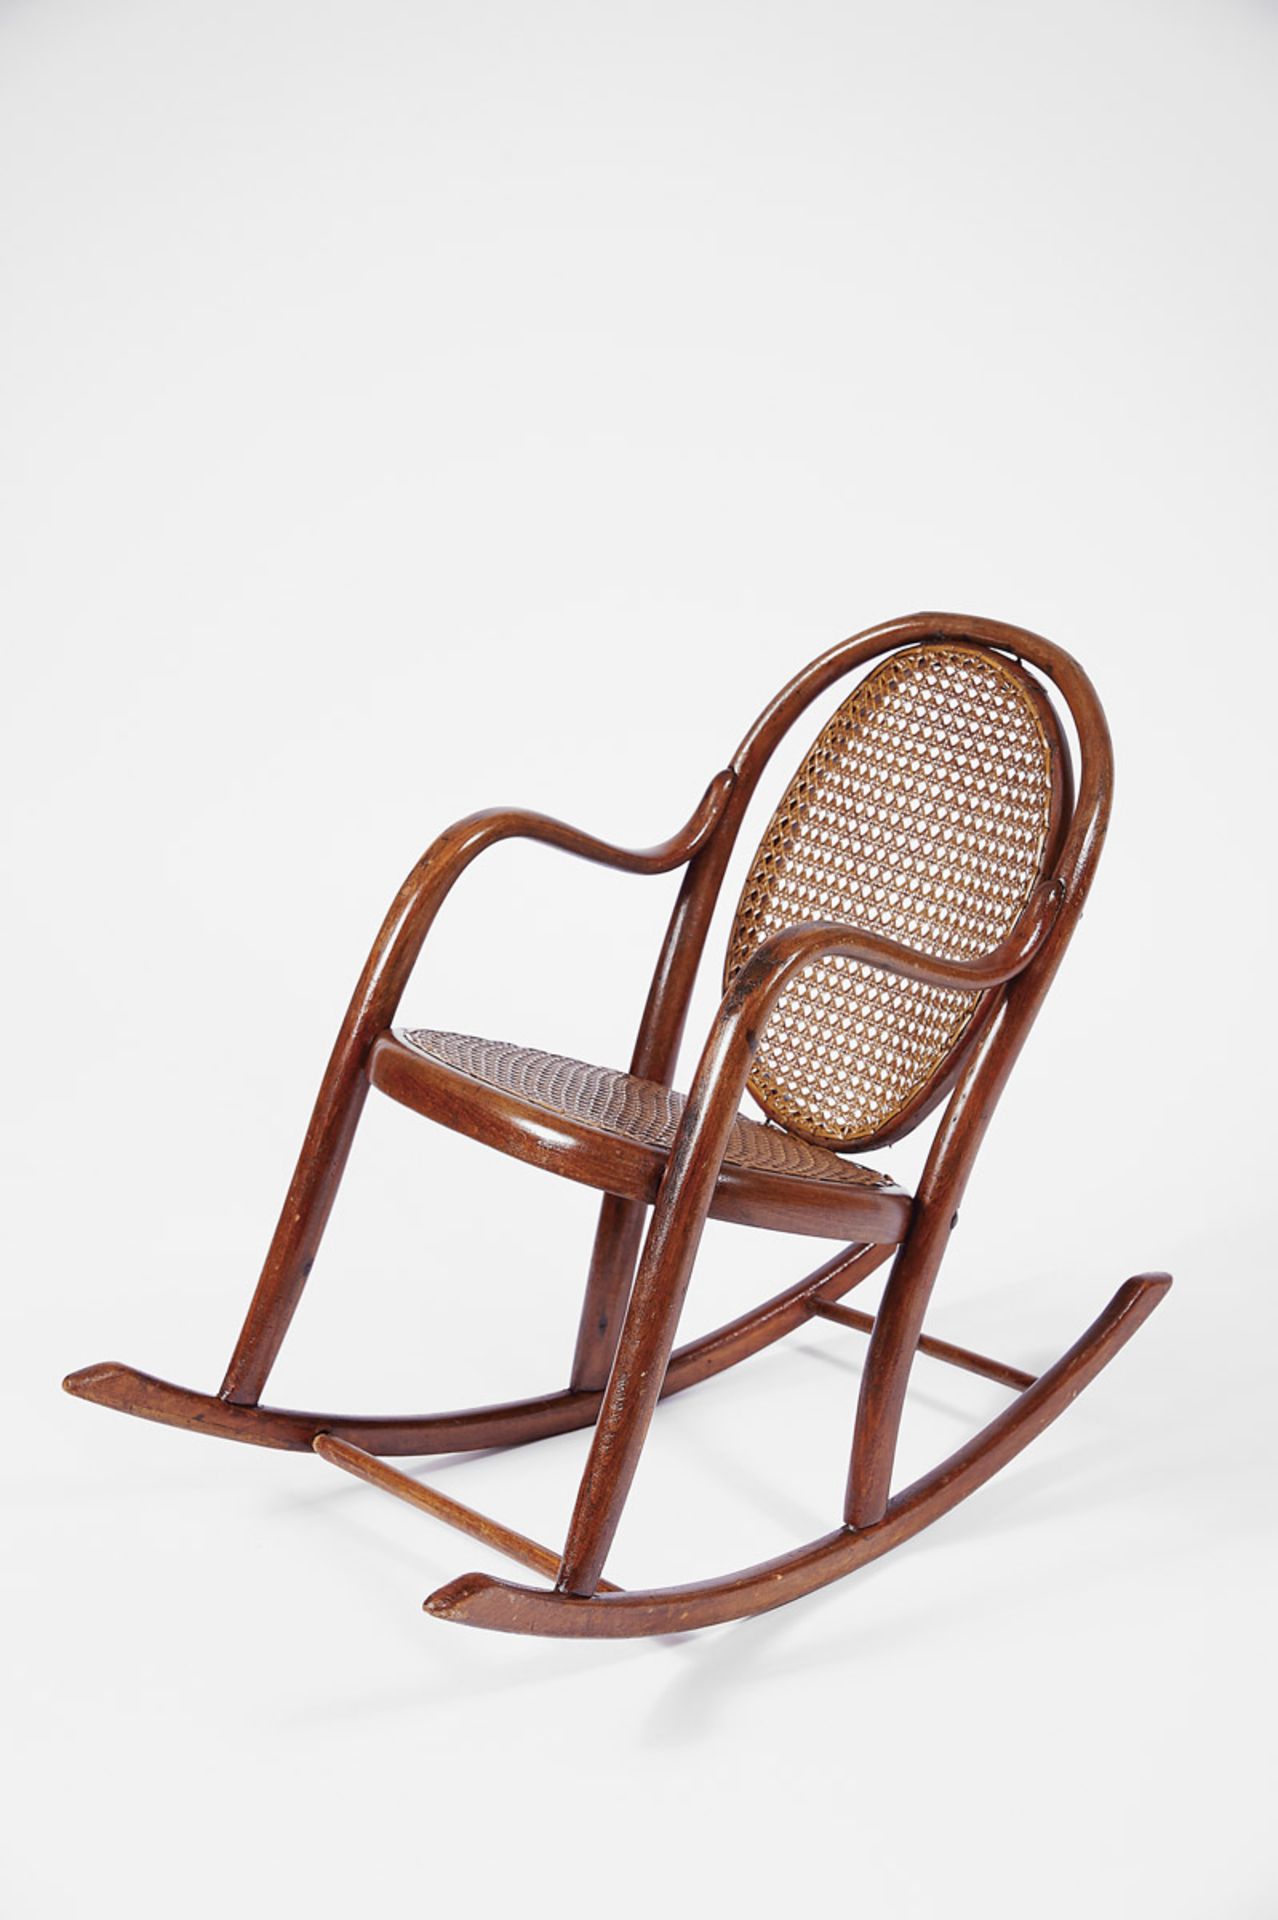 A Small Chair, vapor-bended beech, straw seat, Austrian, 19th/20th C., restoration, model THONET,